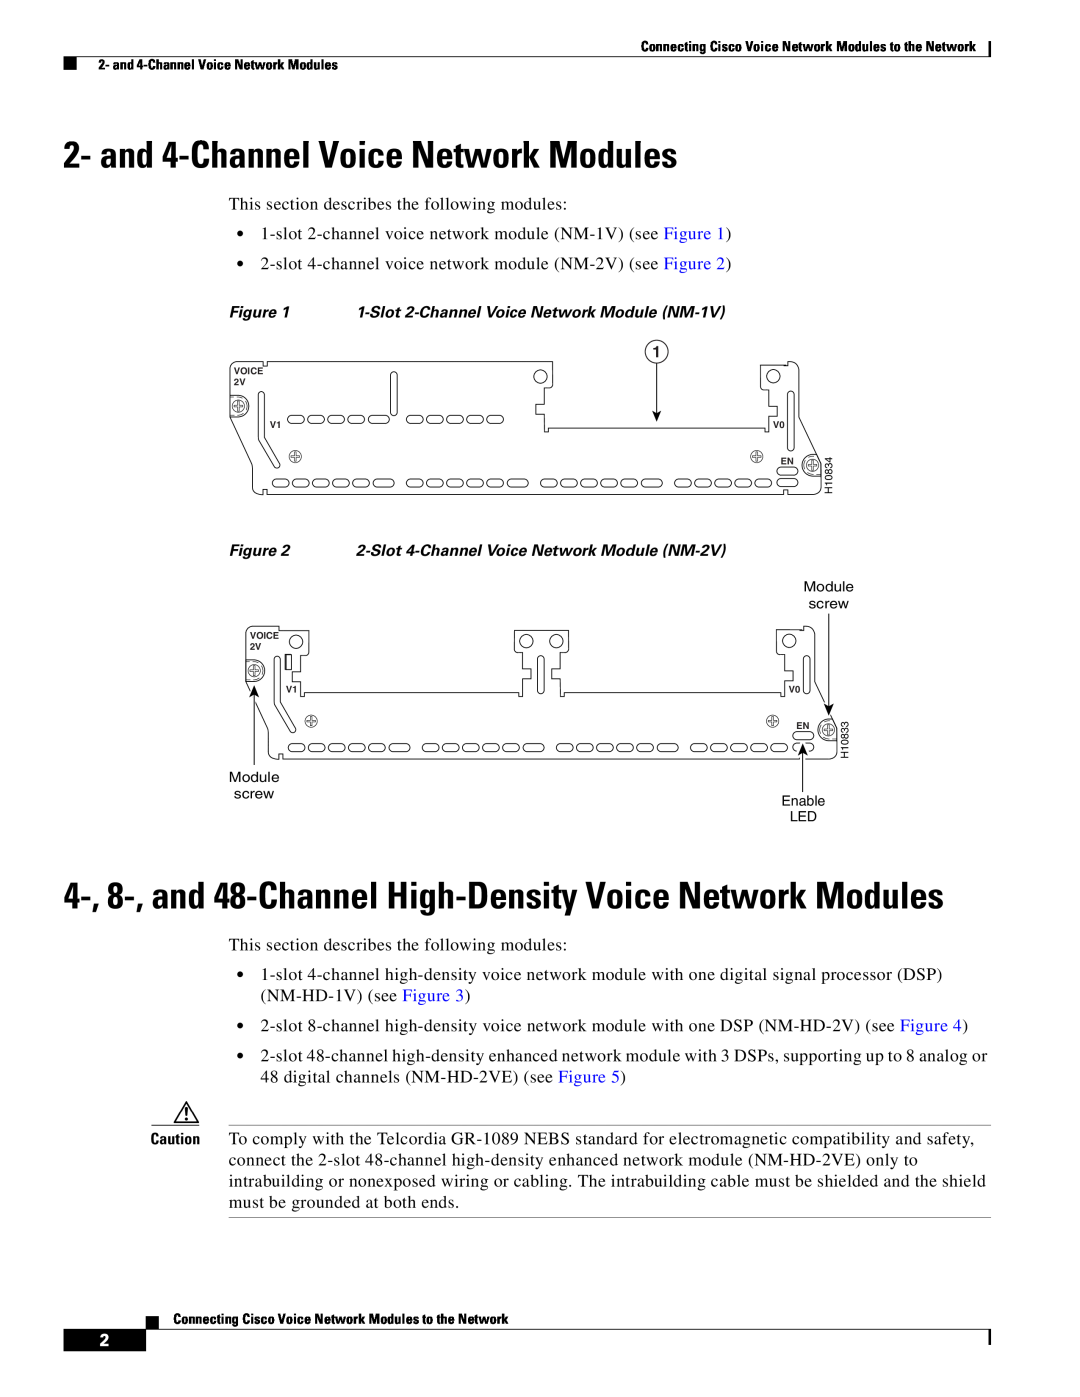 Cisco Systems OL-12812-01 and 4-Channel Voice Network Modules, 4-, 8-, and 48-Channel High-Density Voice Network Modules 